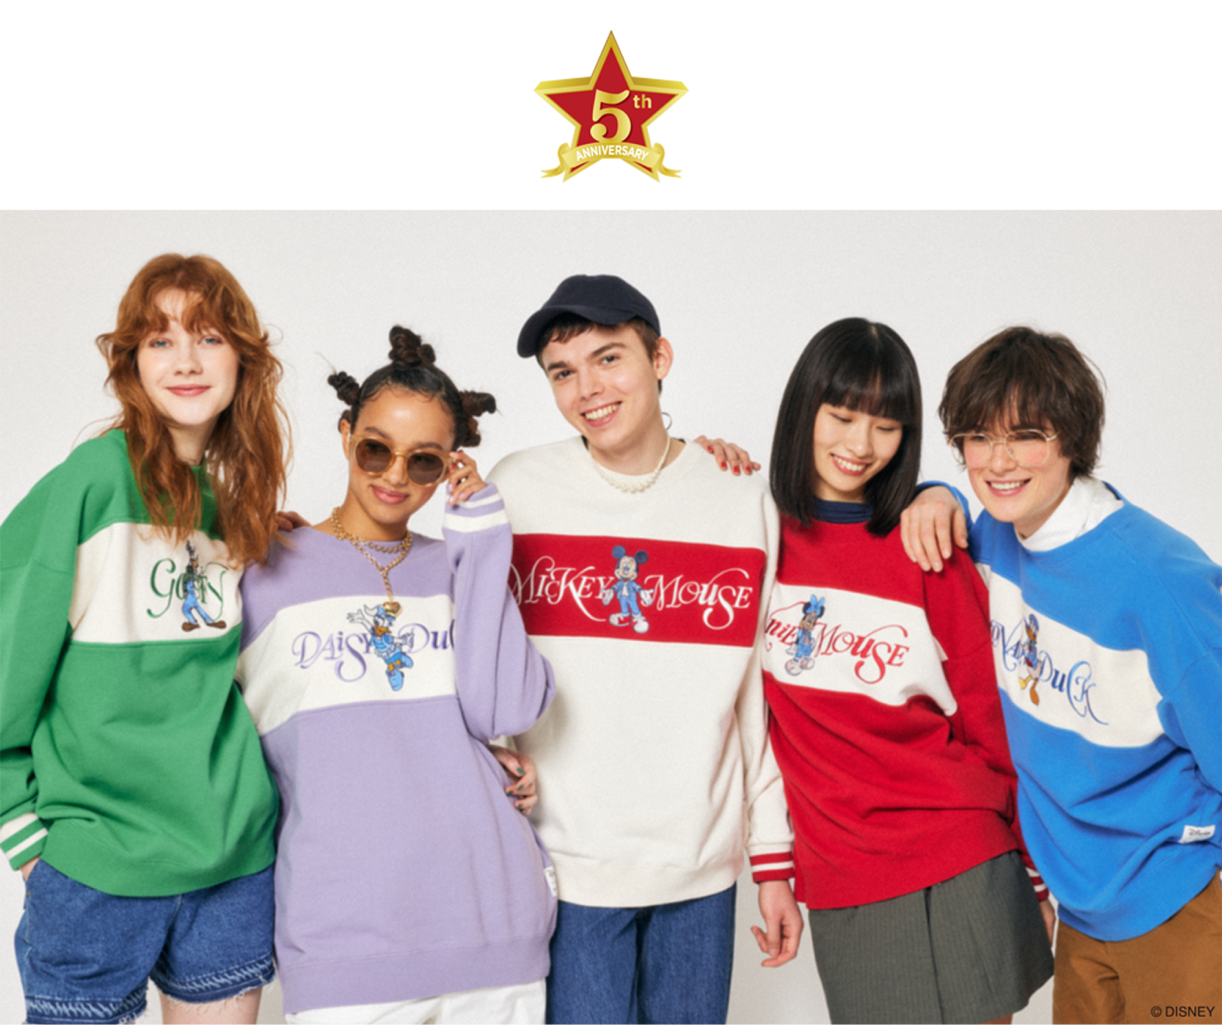 MOUSSY（マウジー）が展開する「Disney SERIES CREATED by MOUSSY」より、5th ANNIVERSARY PRESENT CAMPAIGNを開催！